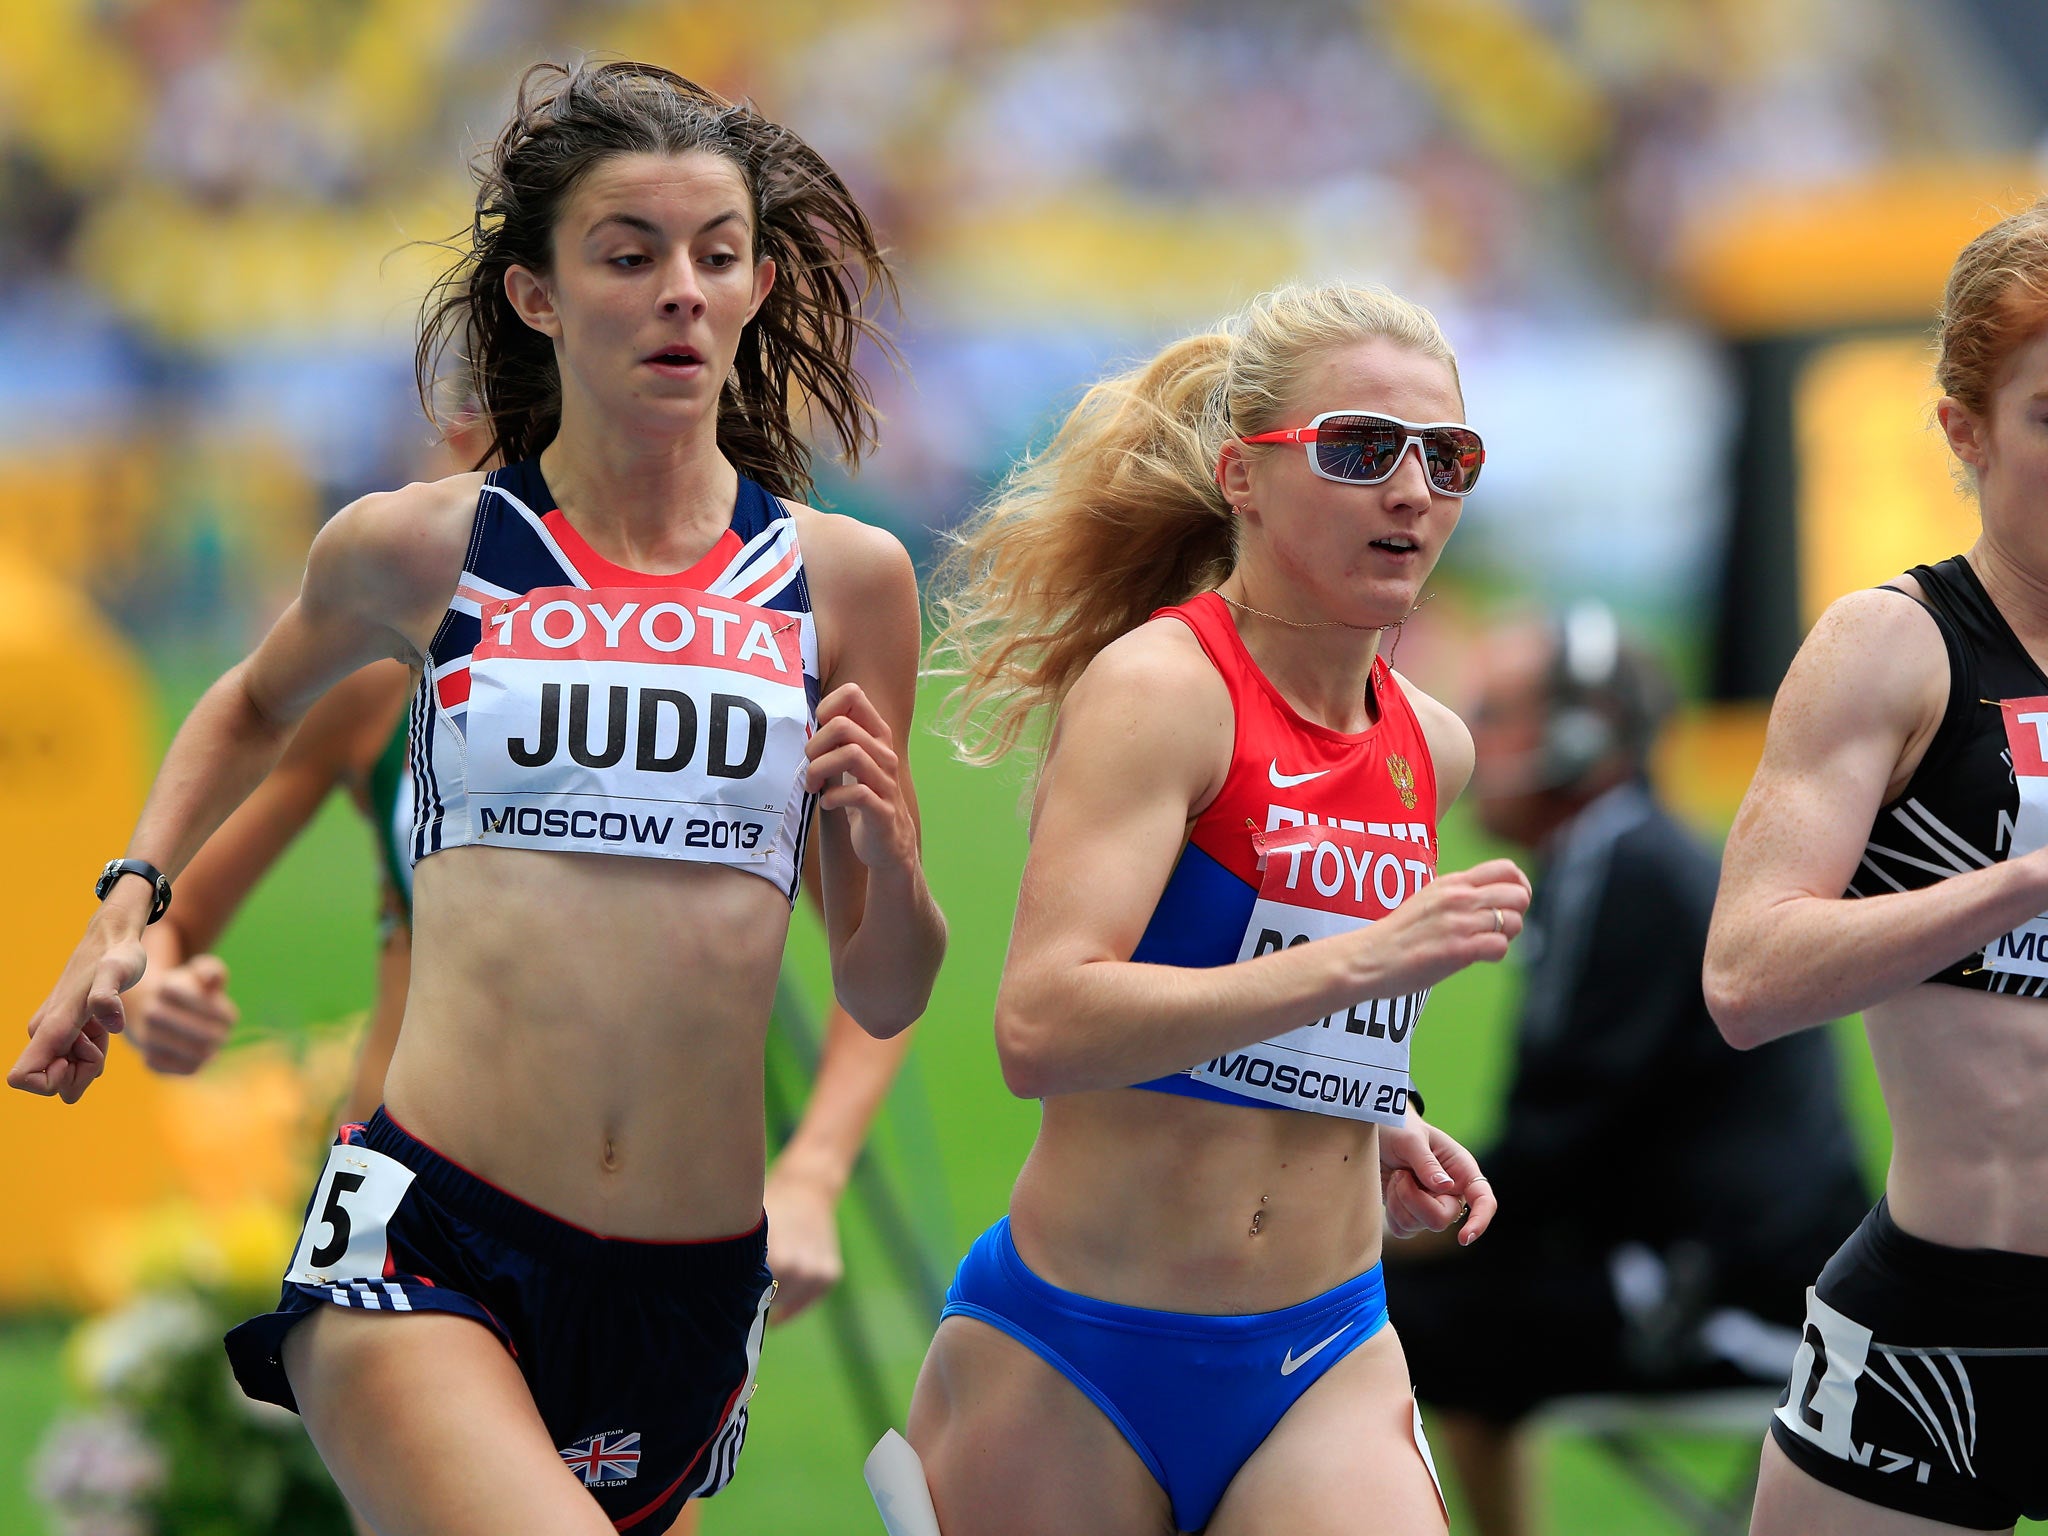 Jessica Judd during the race